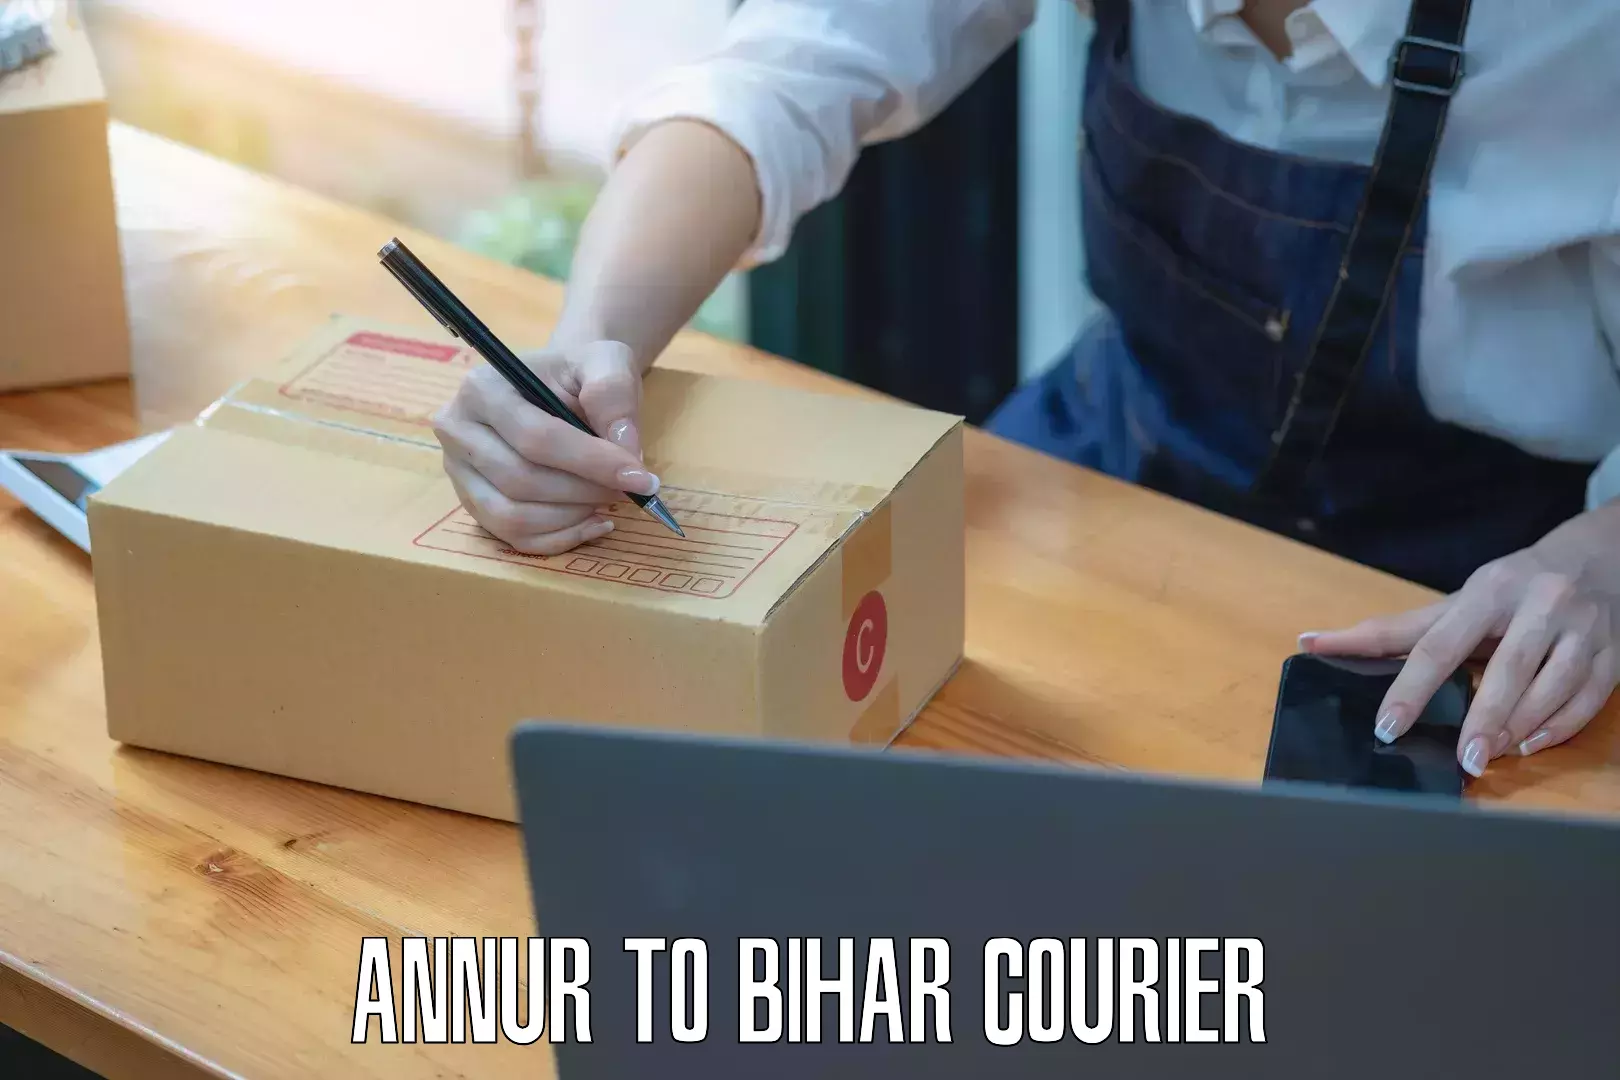 24-hour courier service Annur to Dhaka